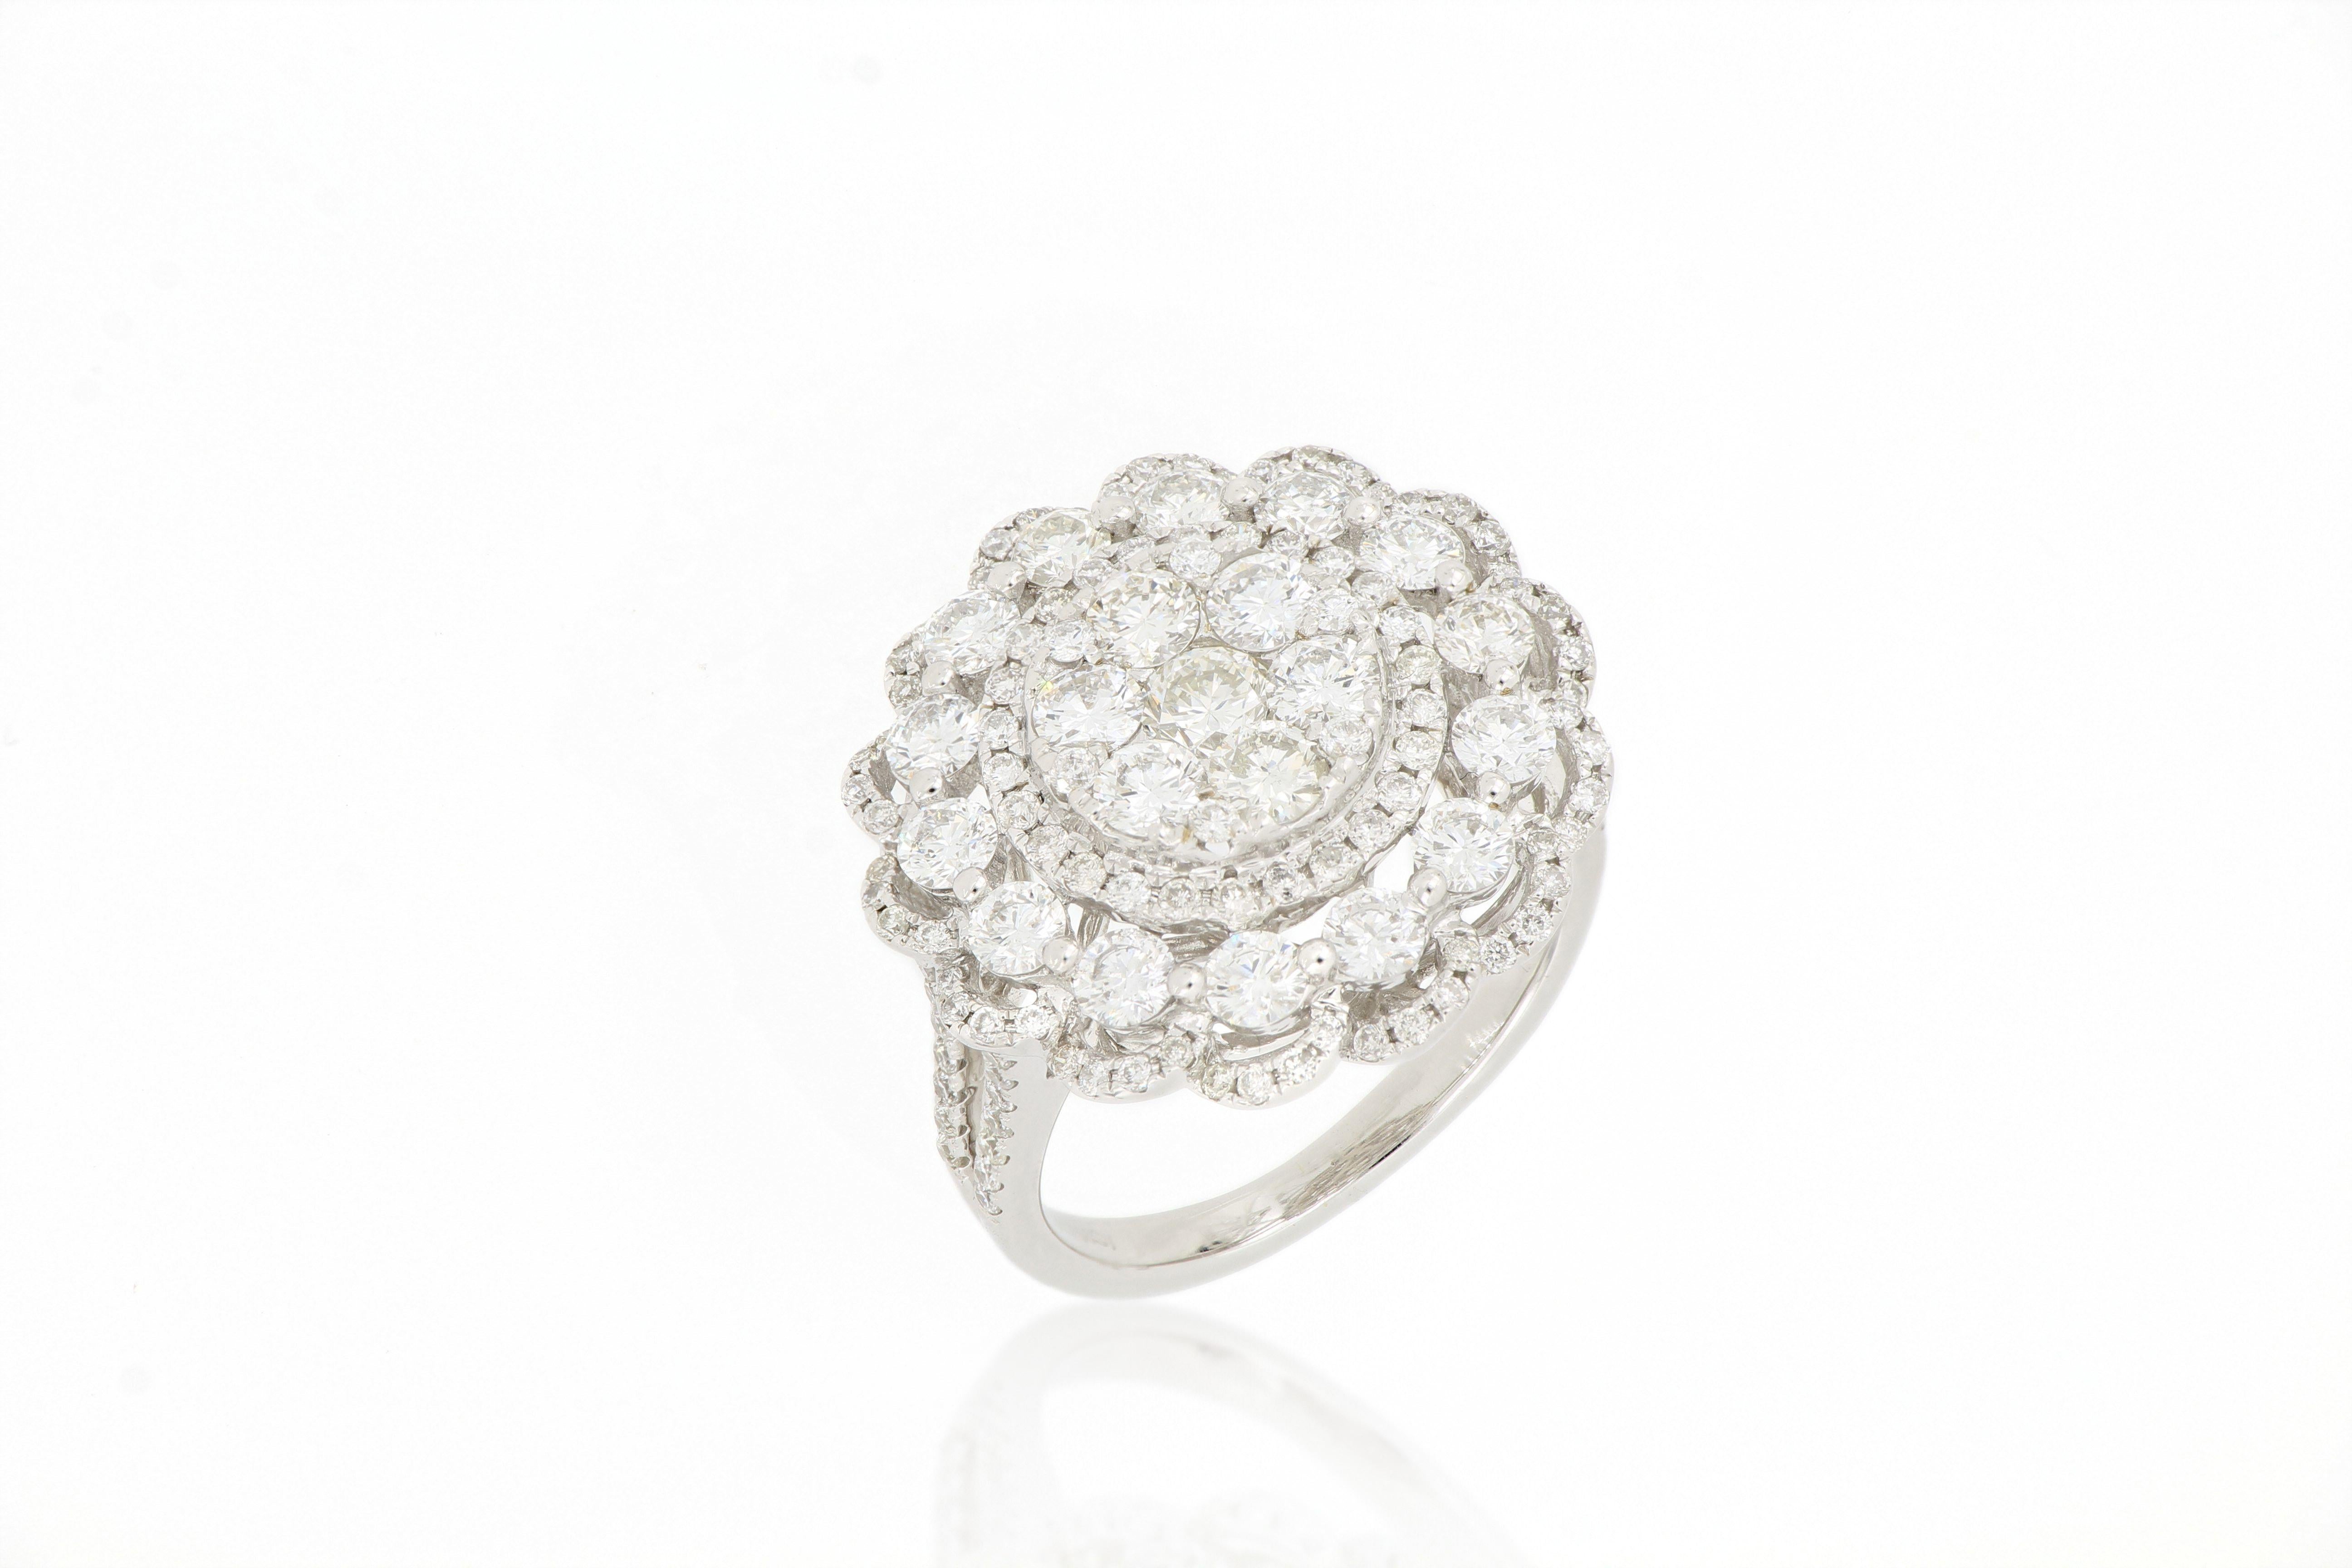 A diamond ring with floral pattern, set with brilliant-cut diamonds weighing  2.94 carats, mounted in 18 Karat white gold.
A beautiful luxurious ring which can be matched with evening dresses of different style.
The company is renowned for its high